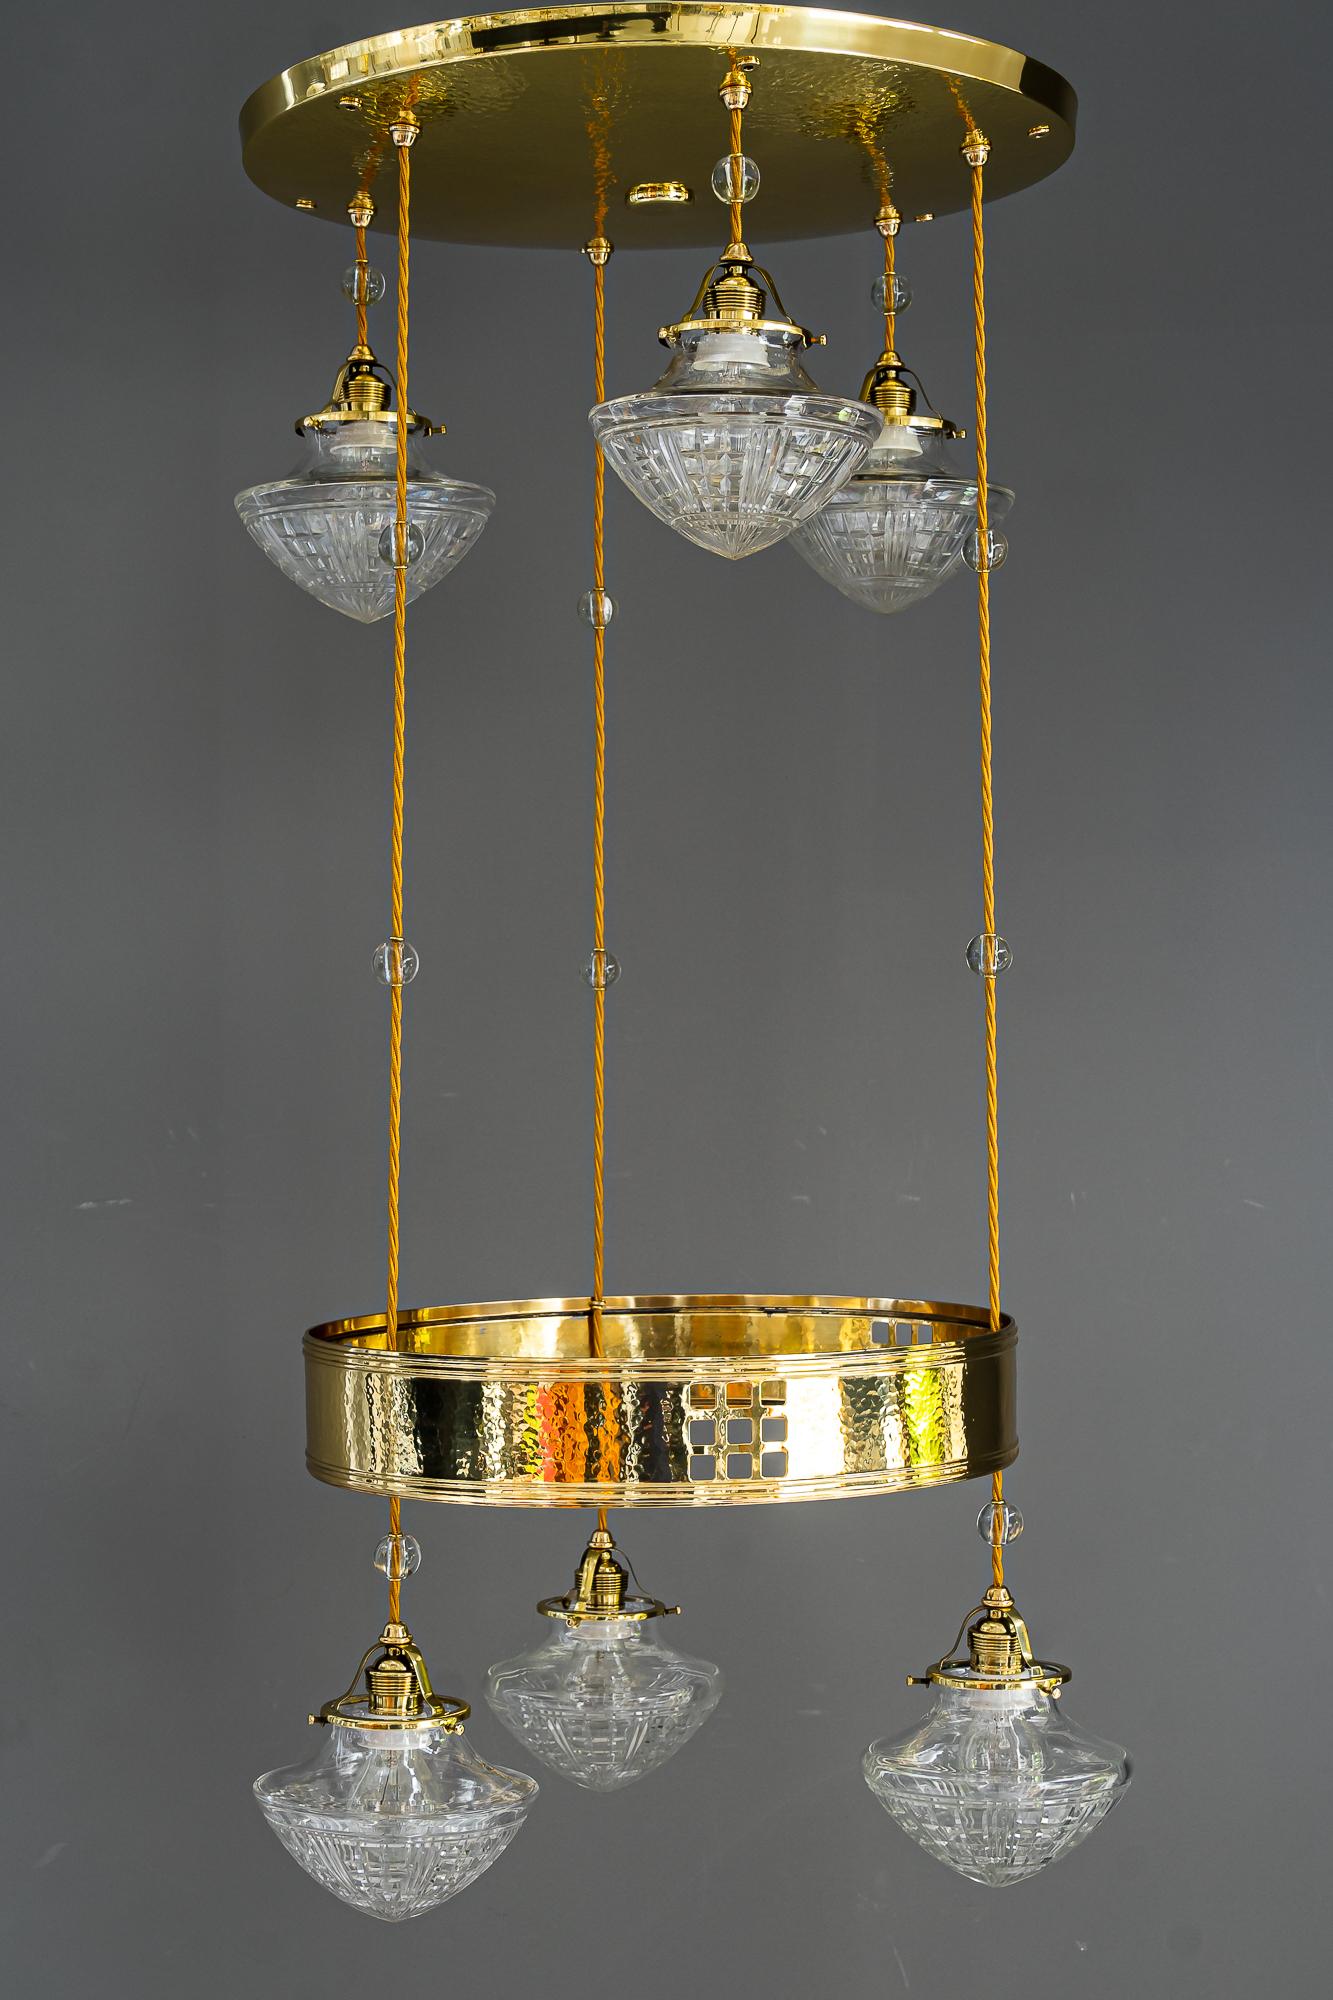 Art Deco chandelier vienna around 1920s
Brass hammered
Polished and stove enamelled
Original antique cut glass shades
We can adjust the height of the chandelier to your room height
The wires are replaced ( new )
The glass balls on the wire are